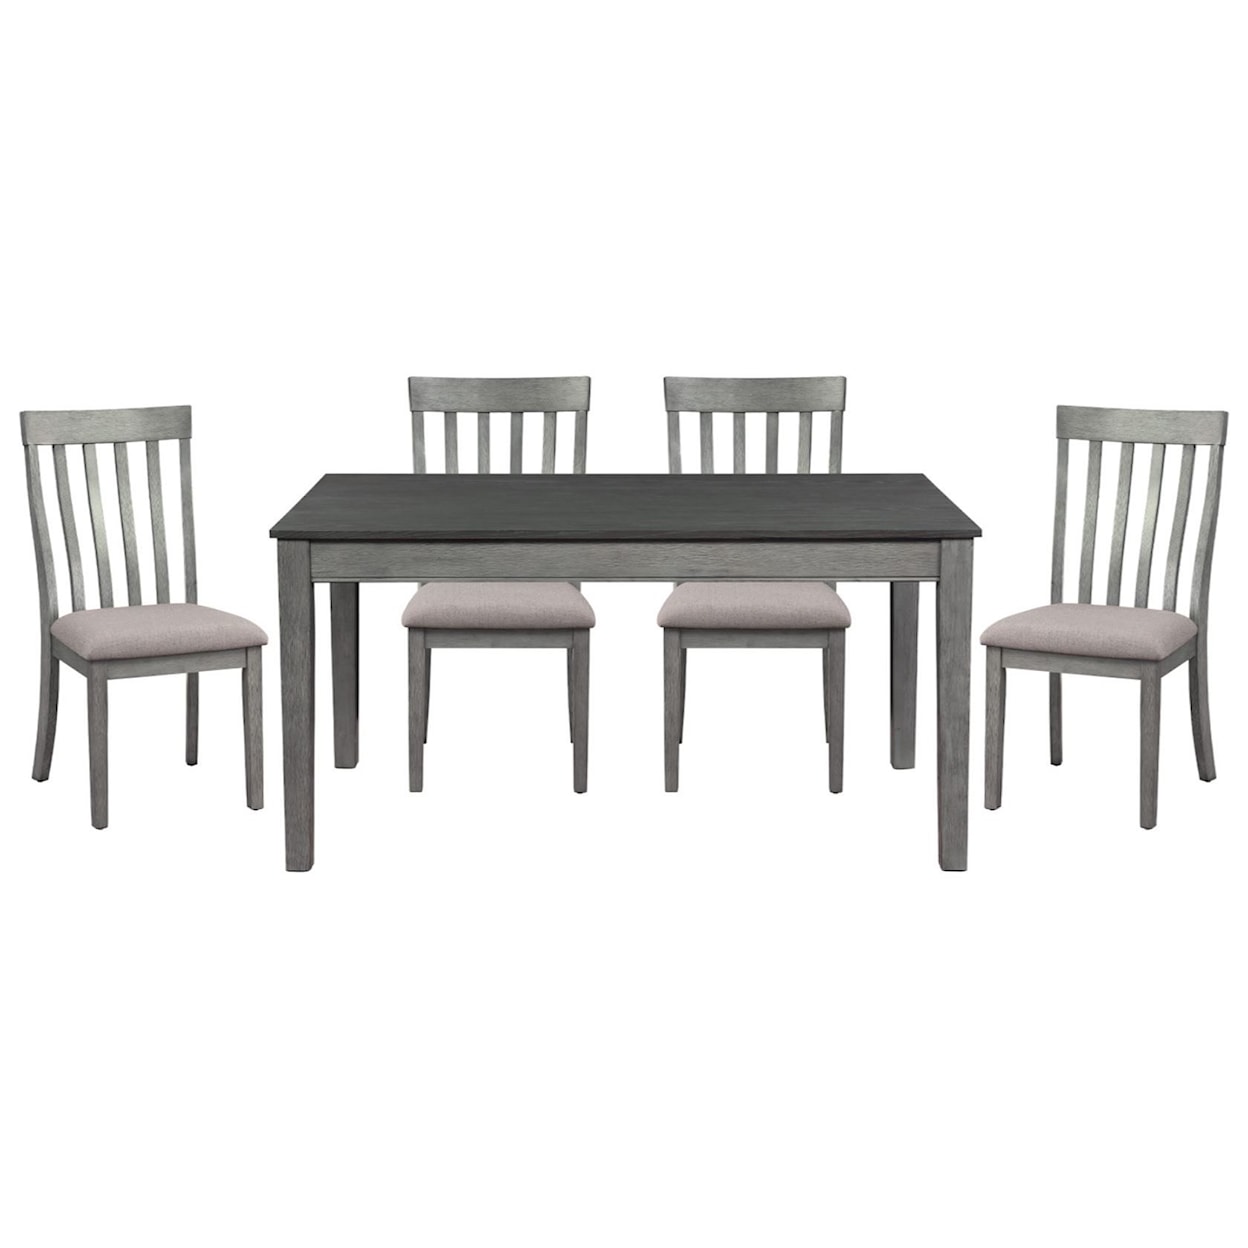 Homelegance Armhurst 5-Piece Table and Chair Set